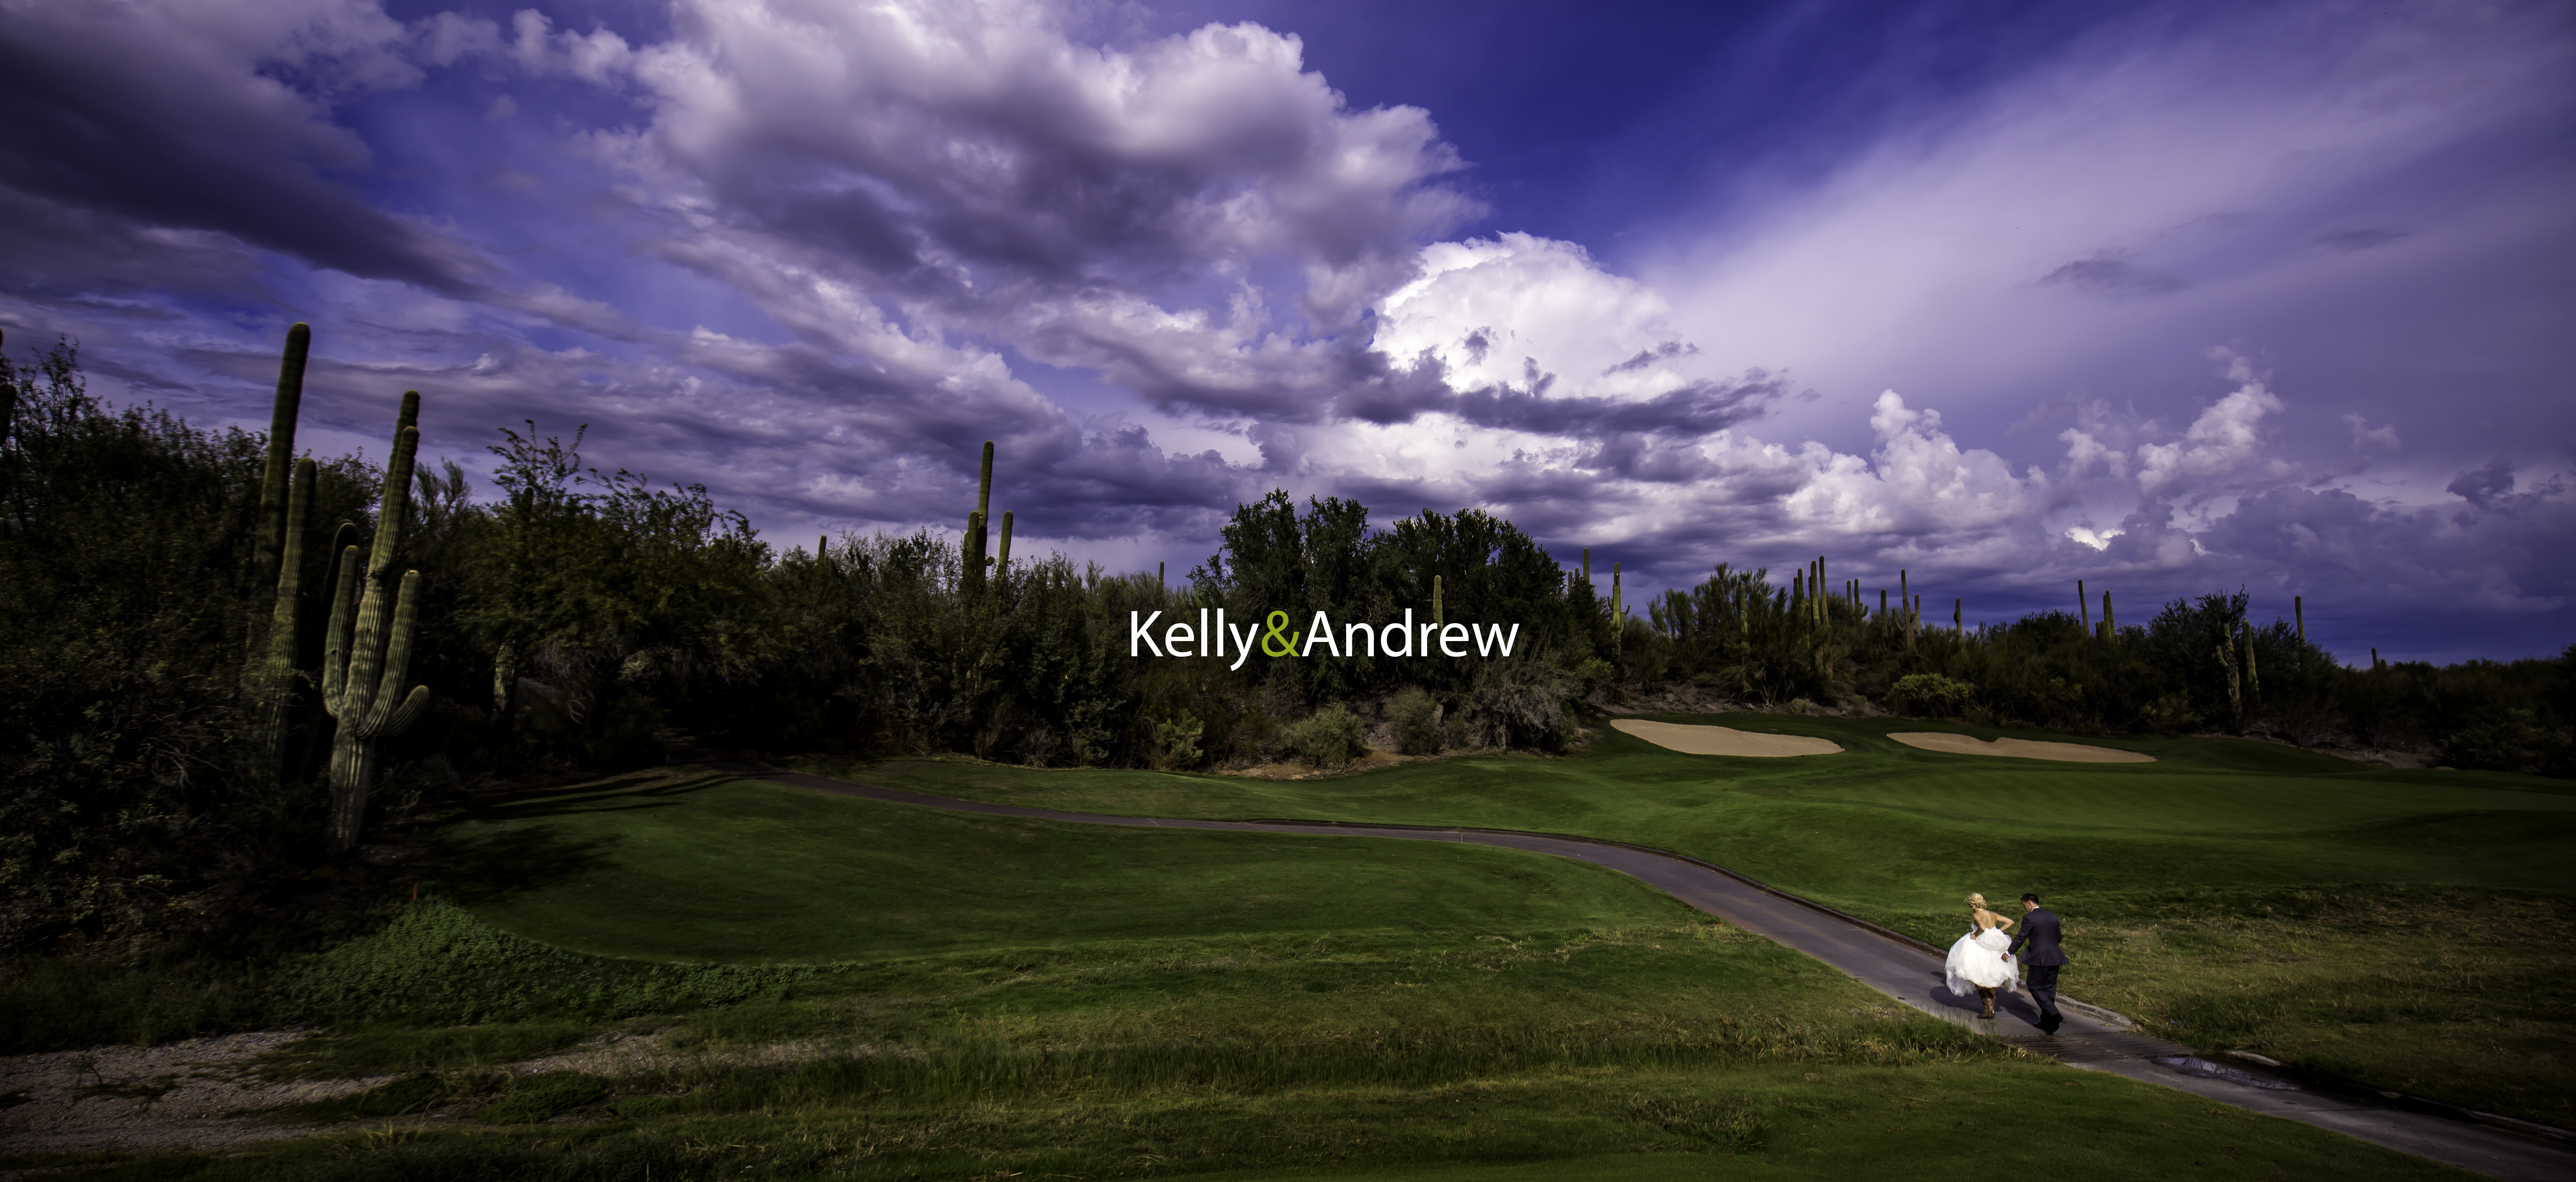 You are currently viewing Kelly & Andrew – Wedding in Cave Creek, AZ